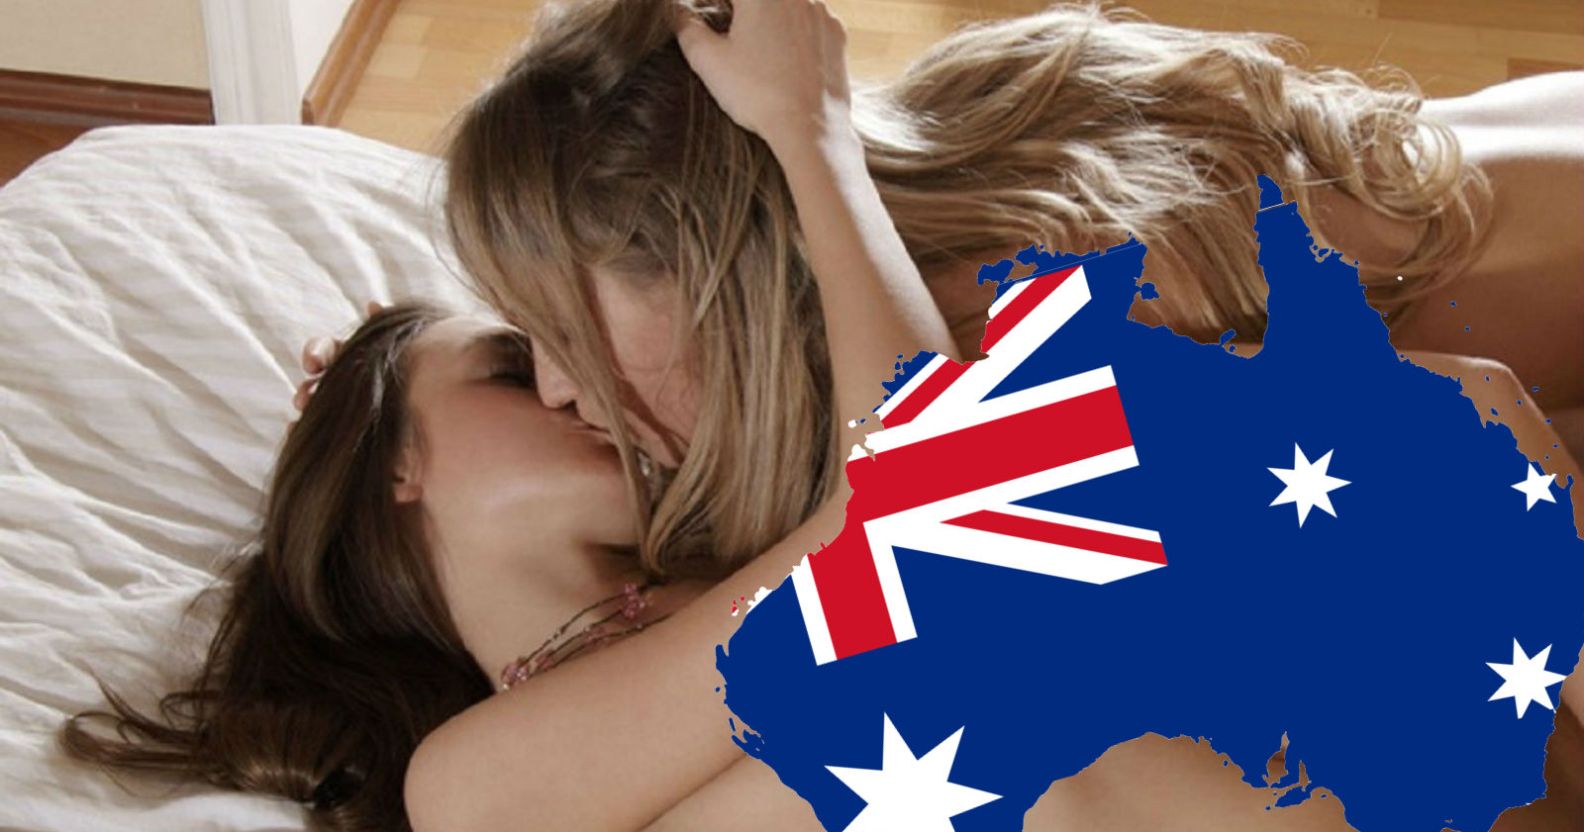 Lesbian Marriage Sex Porn - Australia watched a ton of lesbian porn while blocking their right to marry  | PinkNews